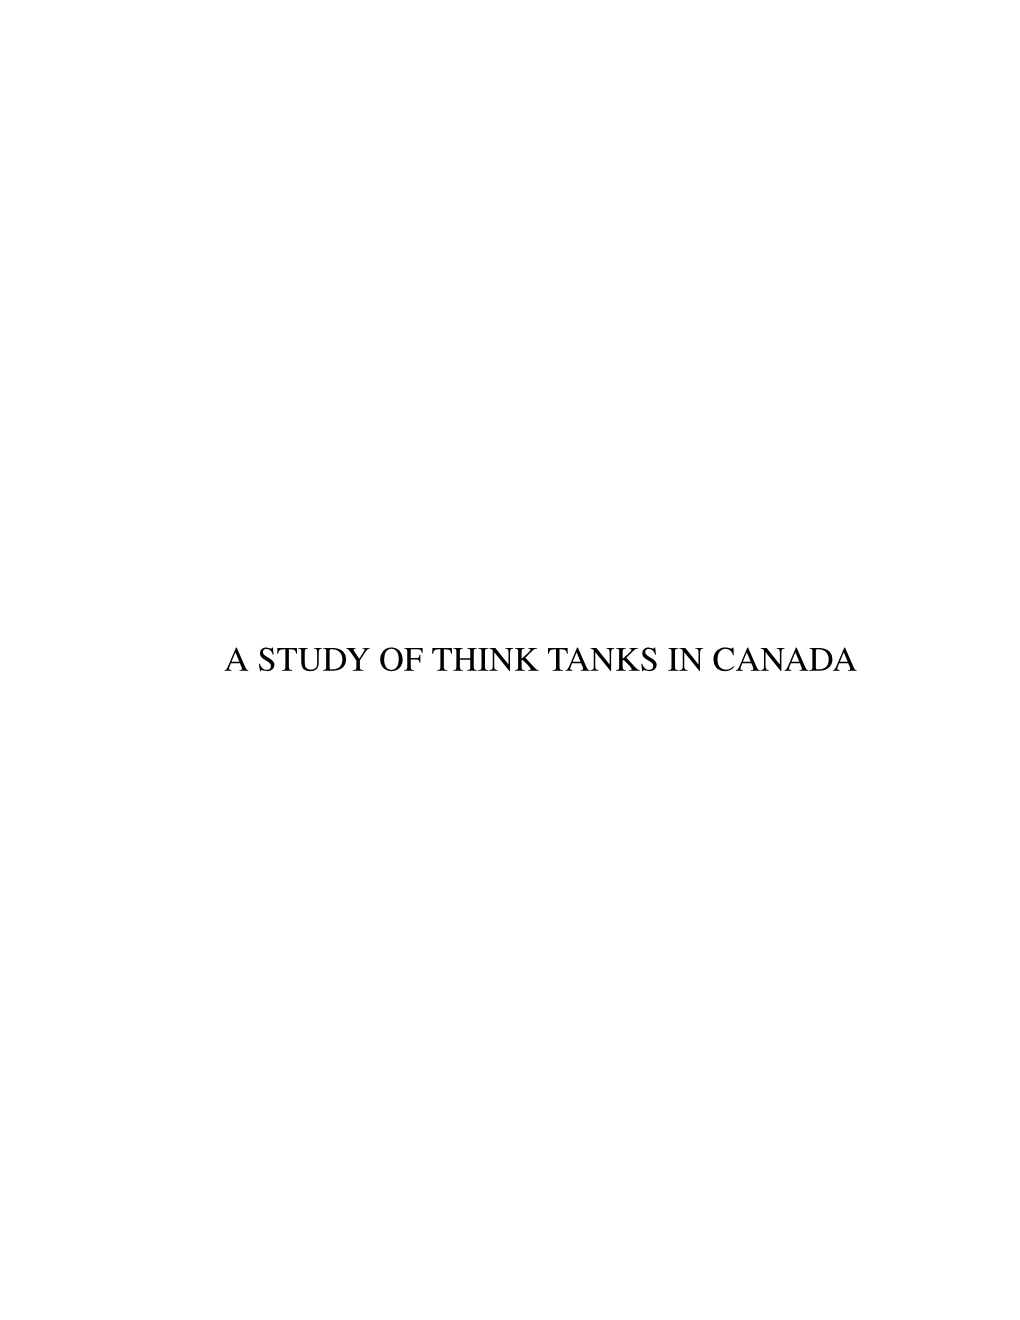 Producing and Promoting Policy Ideas: a Study of Think Tanks in Canada